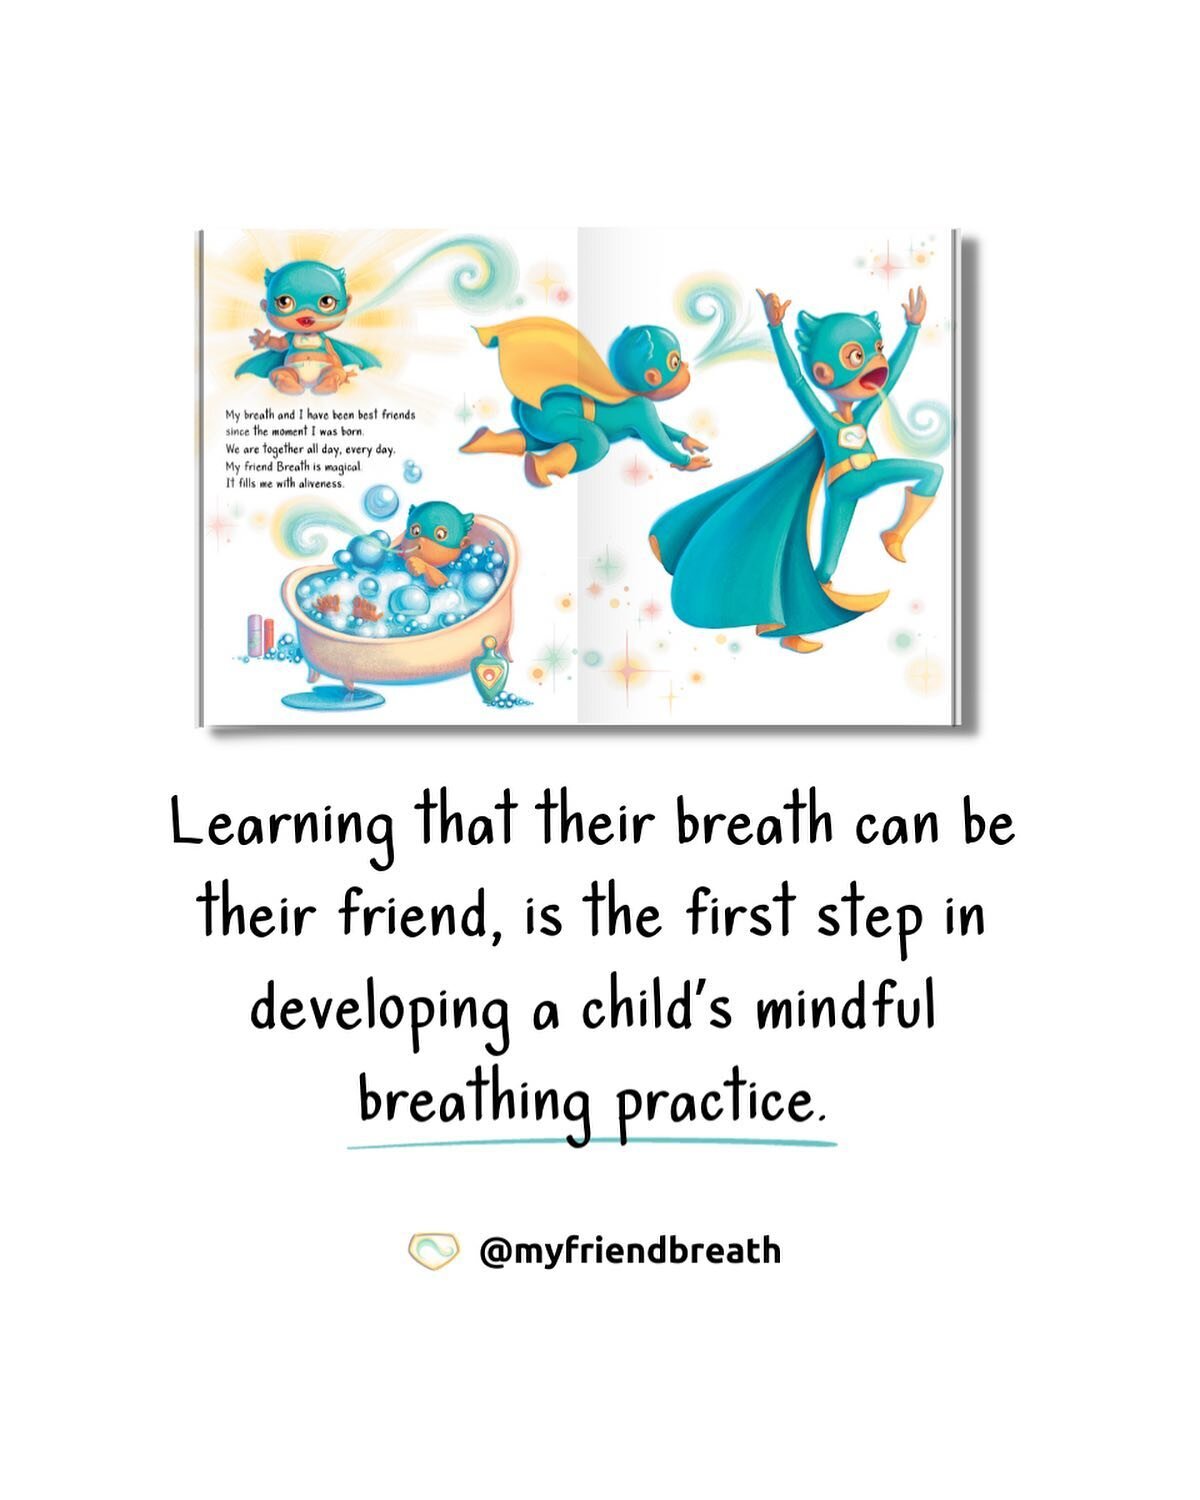 You + your breath = BFF&rsquo;s for life 😍

Your breath is with you from the moment you are born, and it&rsquo;s there to support you both unconsciously and consciously throughout your entire life.

Learning that their breath can be their friend, is